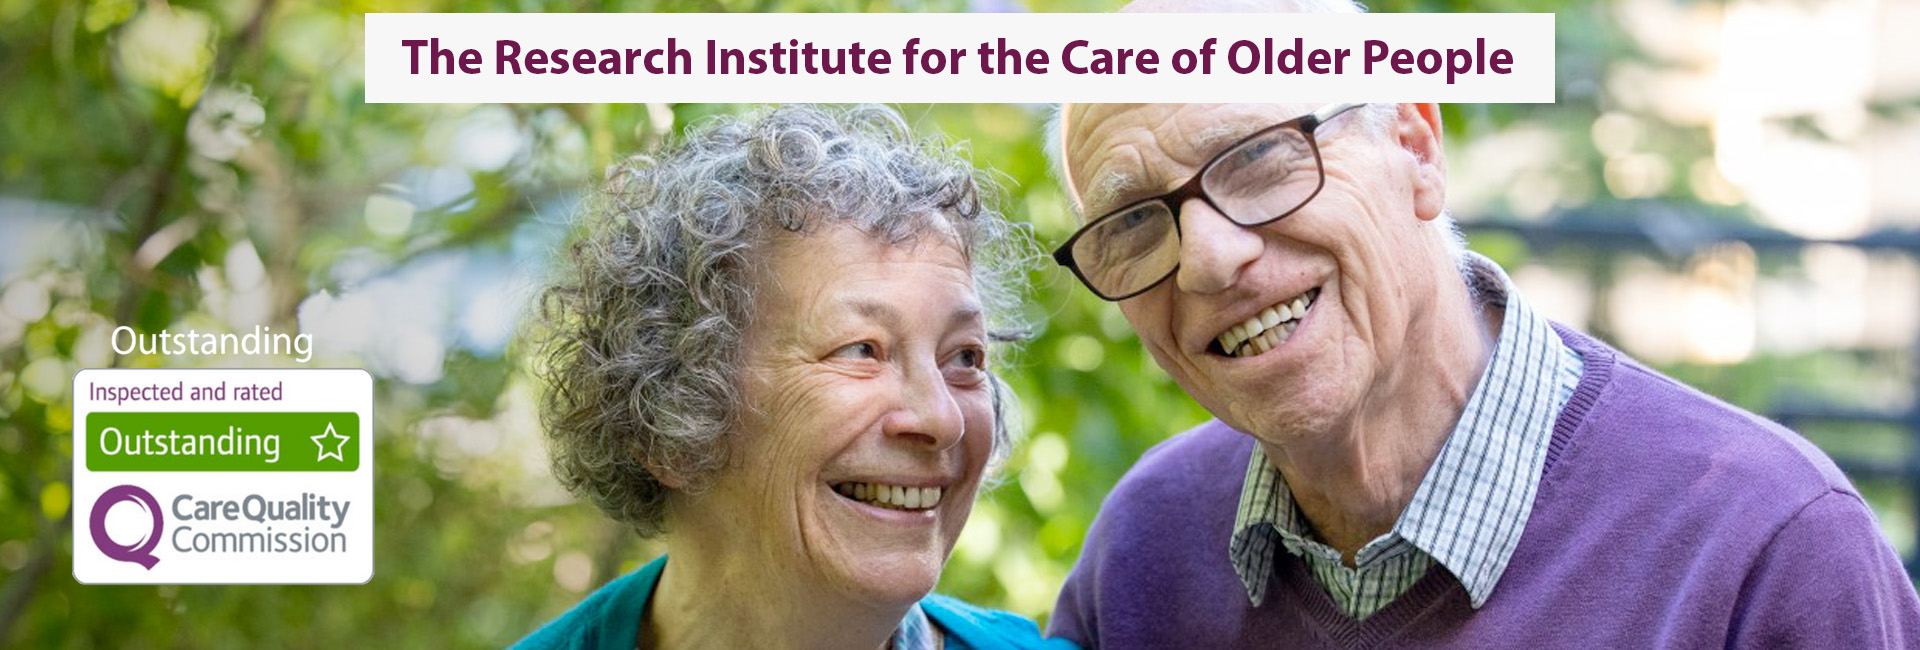 The Research Institute for the Care of Older People